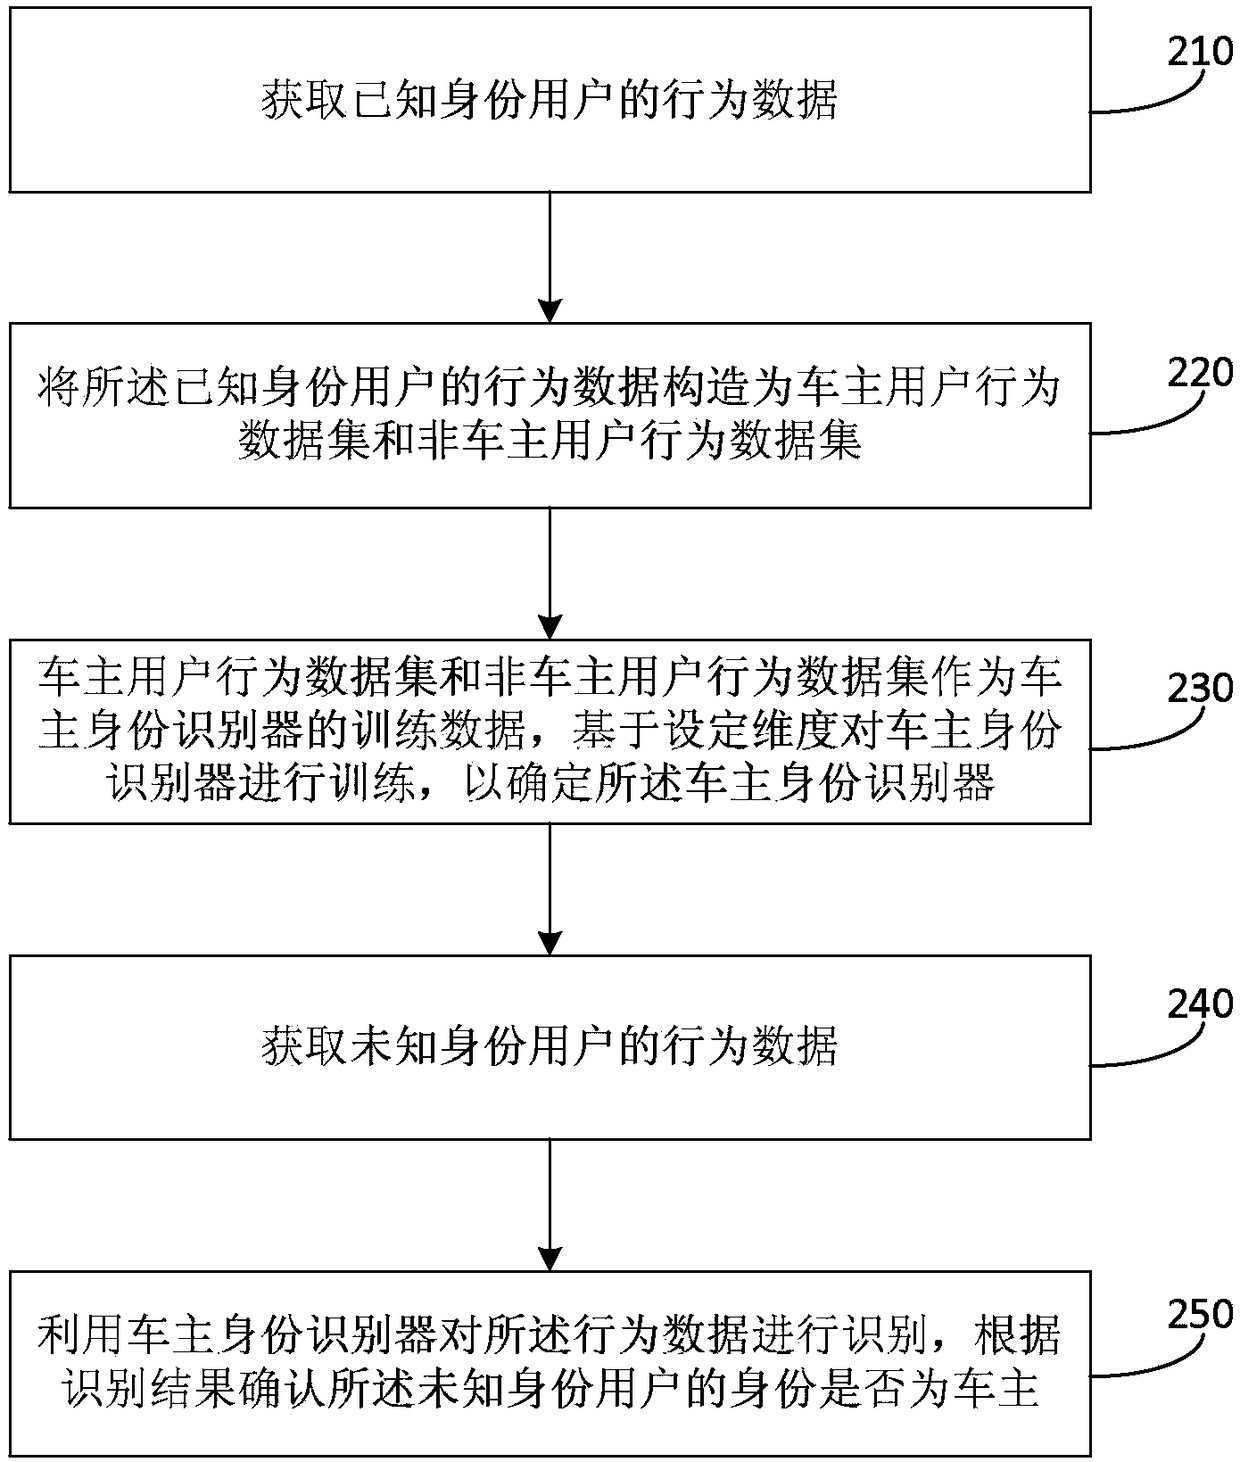 A method and device for vehicle owner identification based on user behavior data